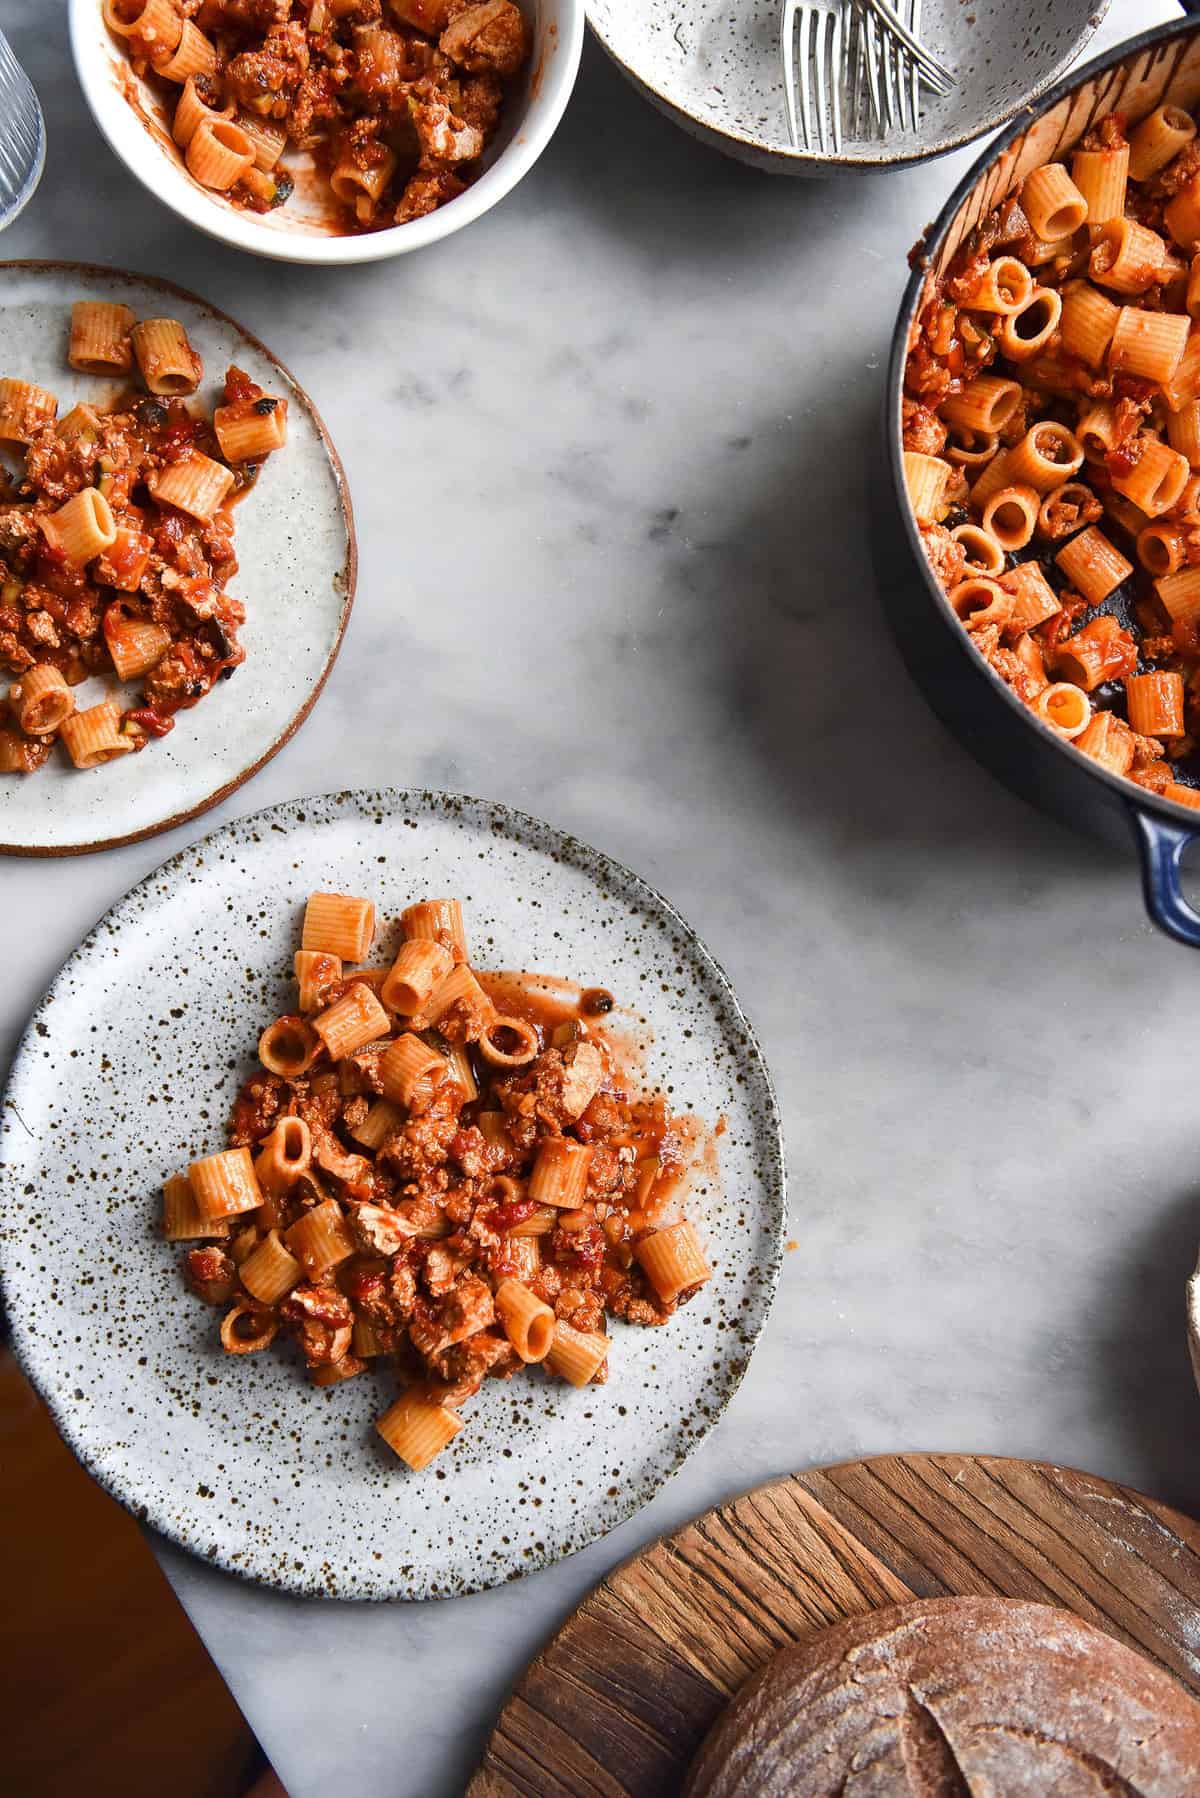 An aerial image of vegan bolognese on rigatoni pasta. The central plate is a white ceramic speckled plate that sits atop a white marble table. It is surrounded by other plates and a blue pot filled with more bolognese.